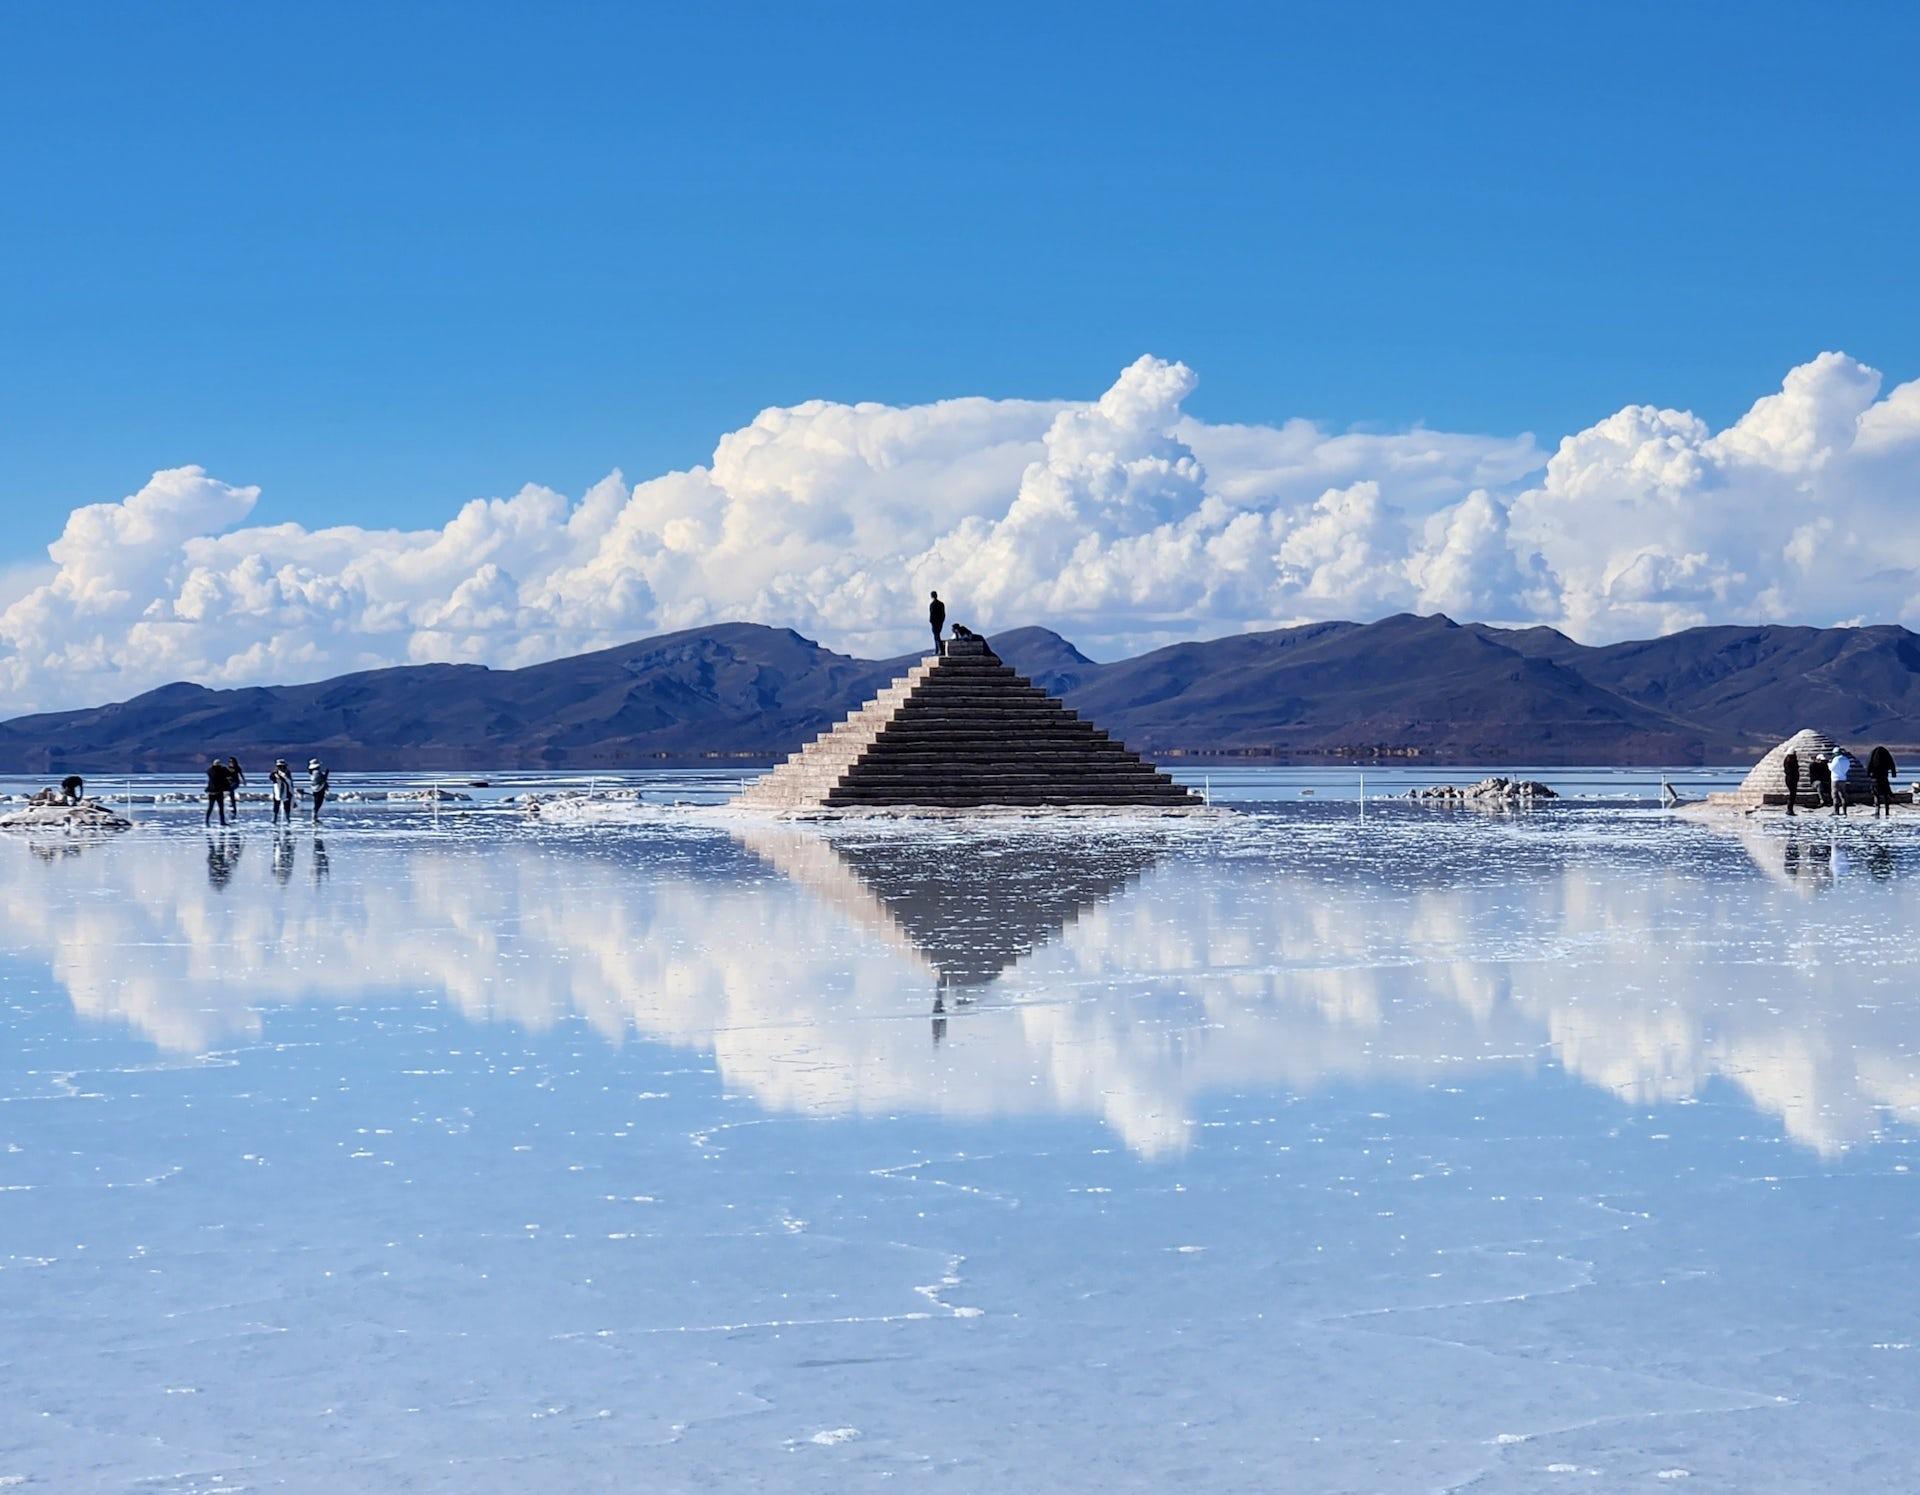 A person standing on a pyramid of dried salt, while the rest of the salt flat looks like the surface of a lake